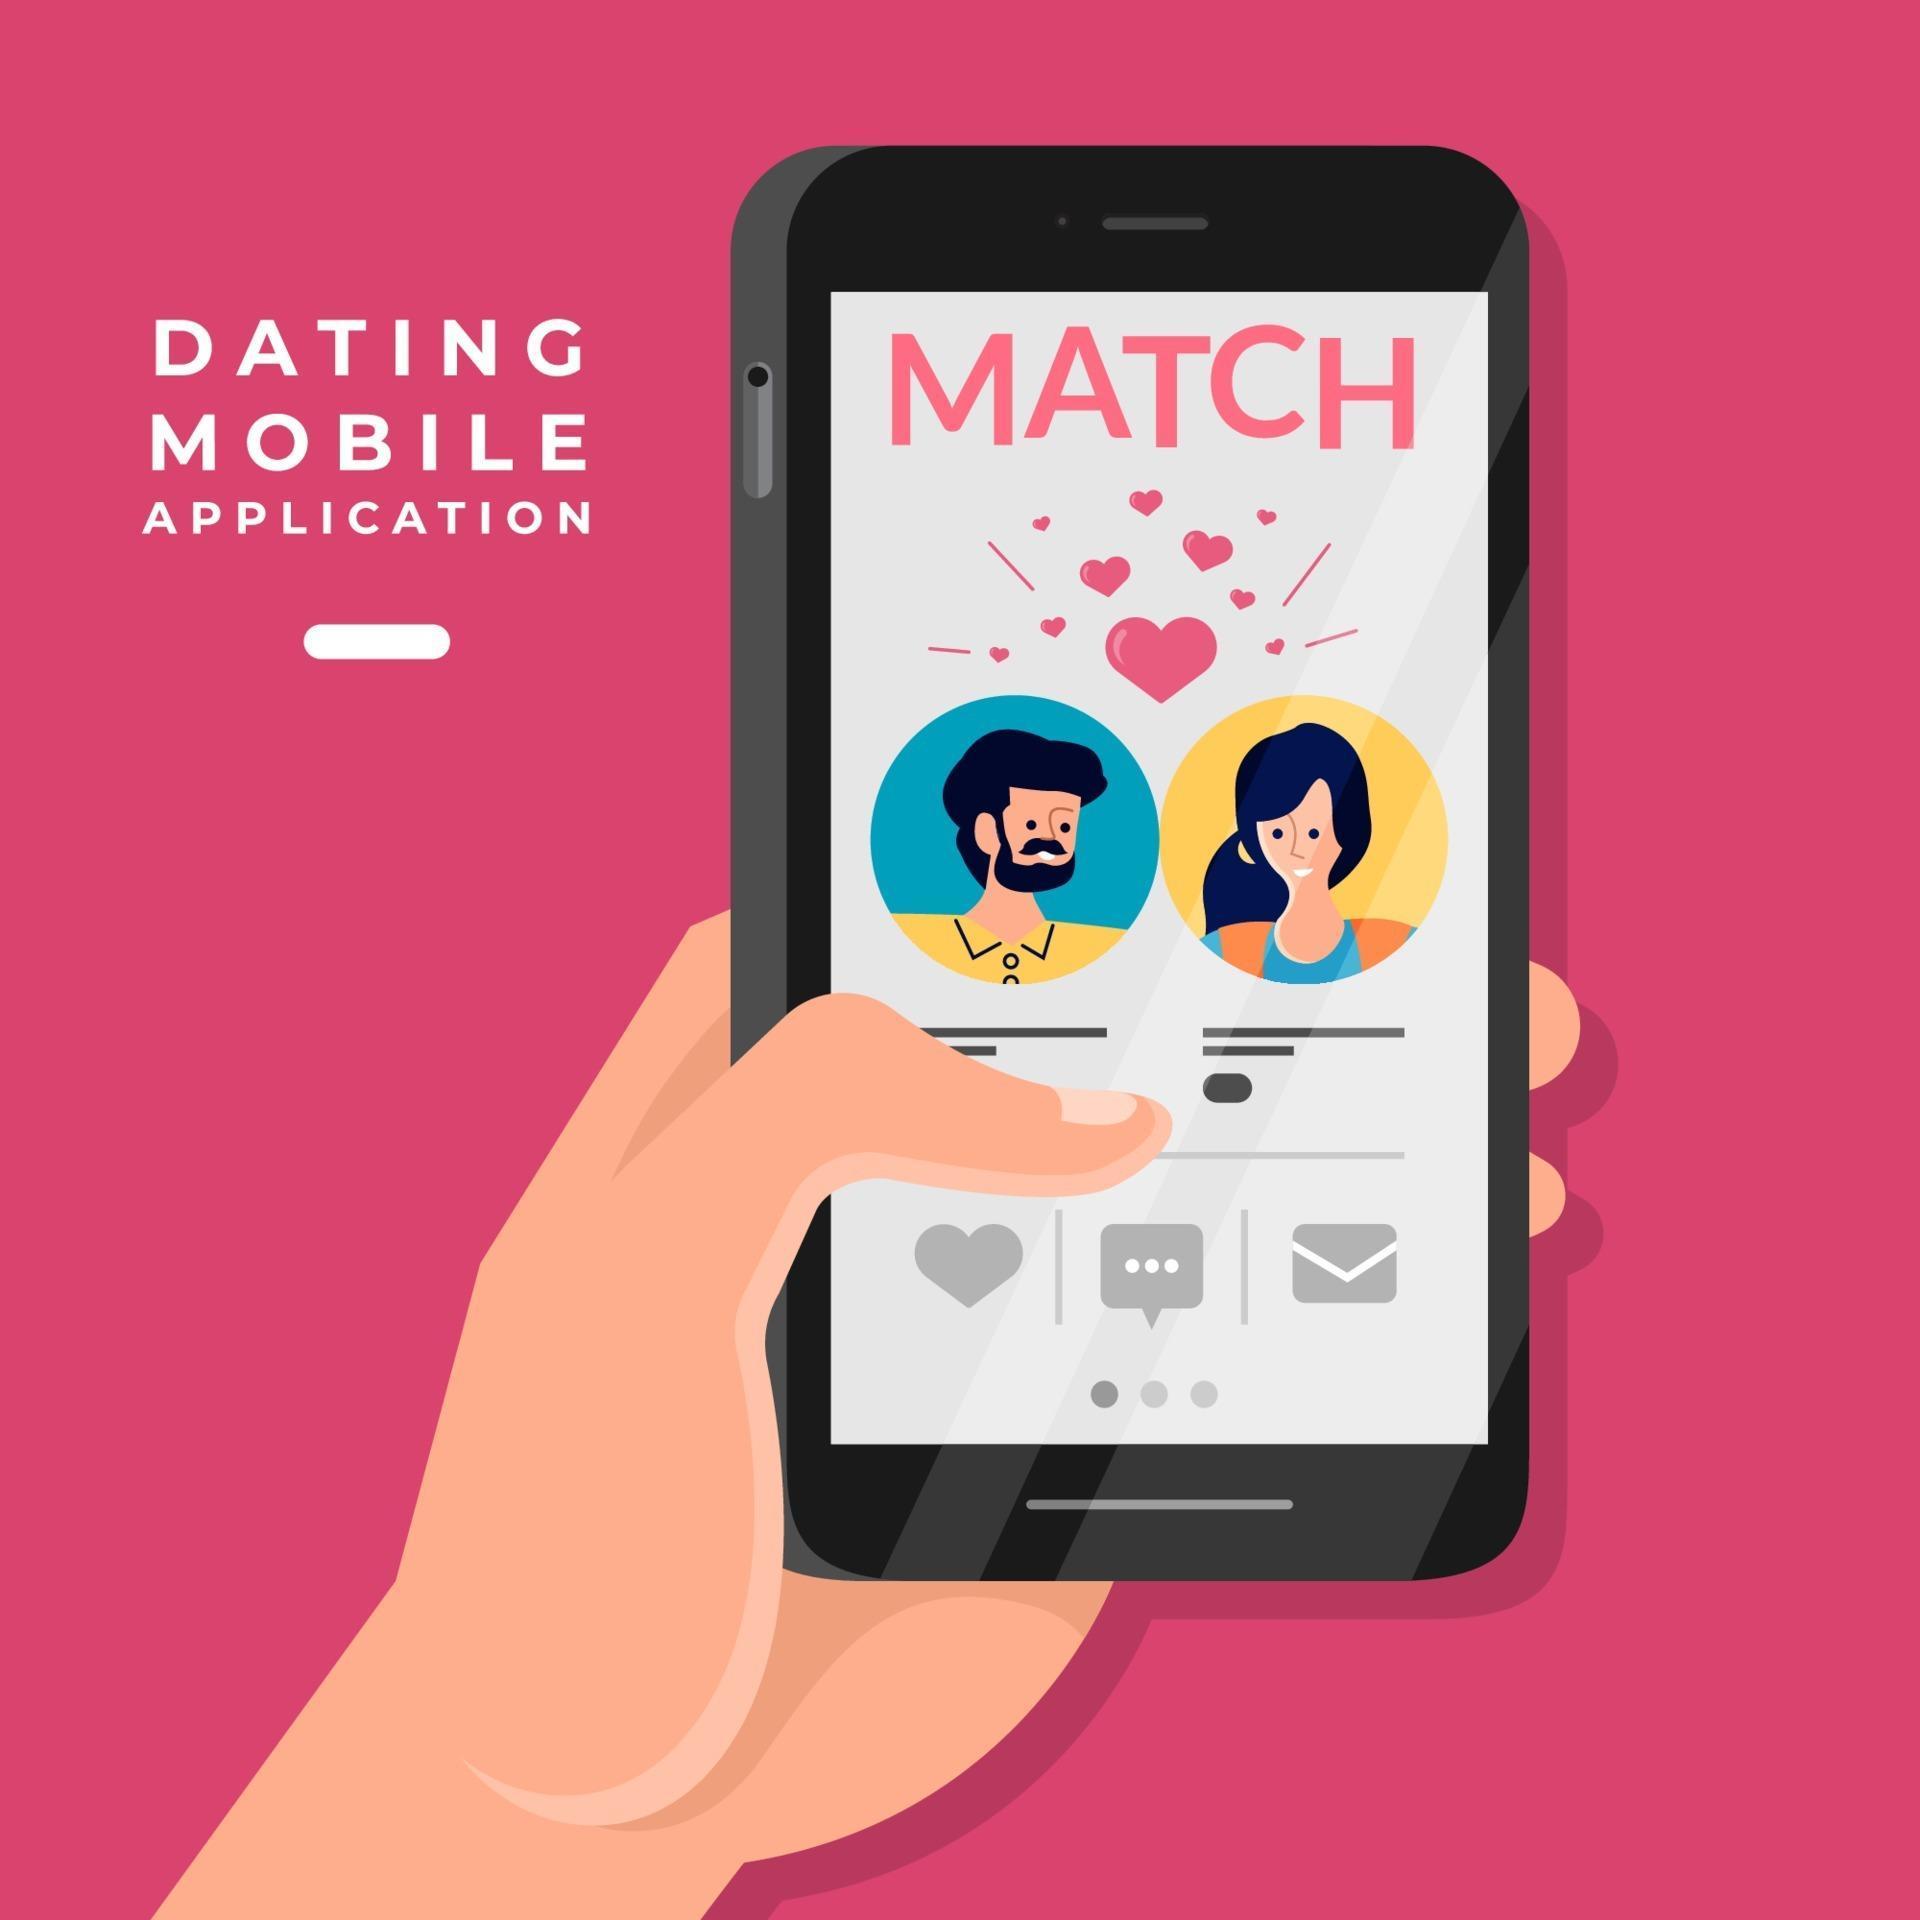 Online Dating - Is It Worth Paying for an App? - The Radi…